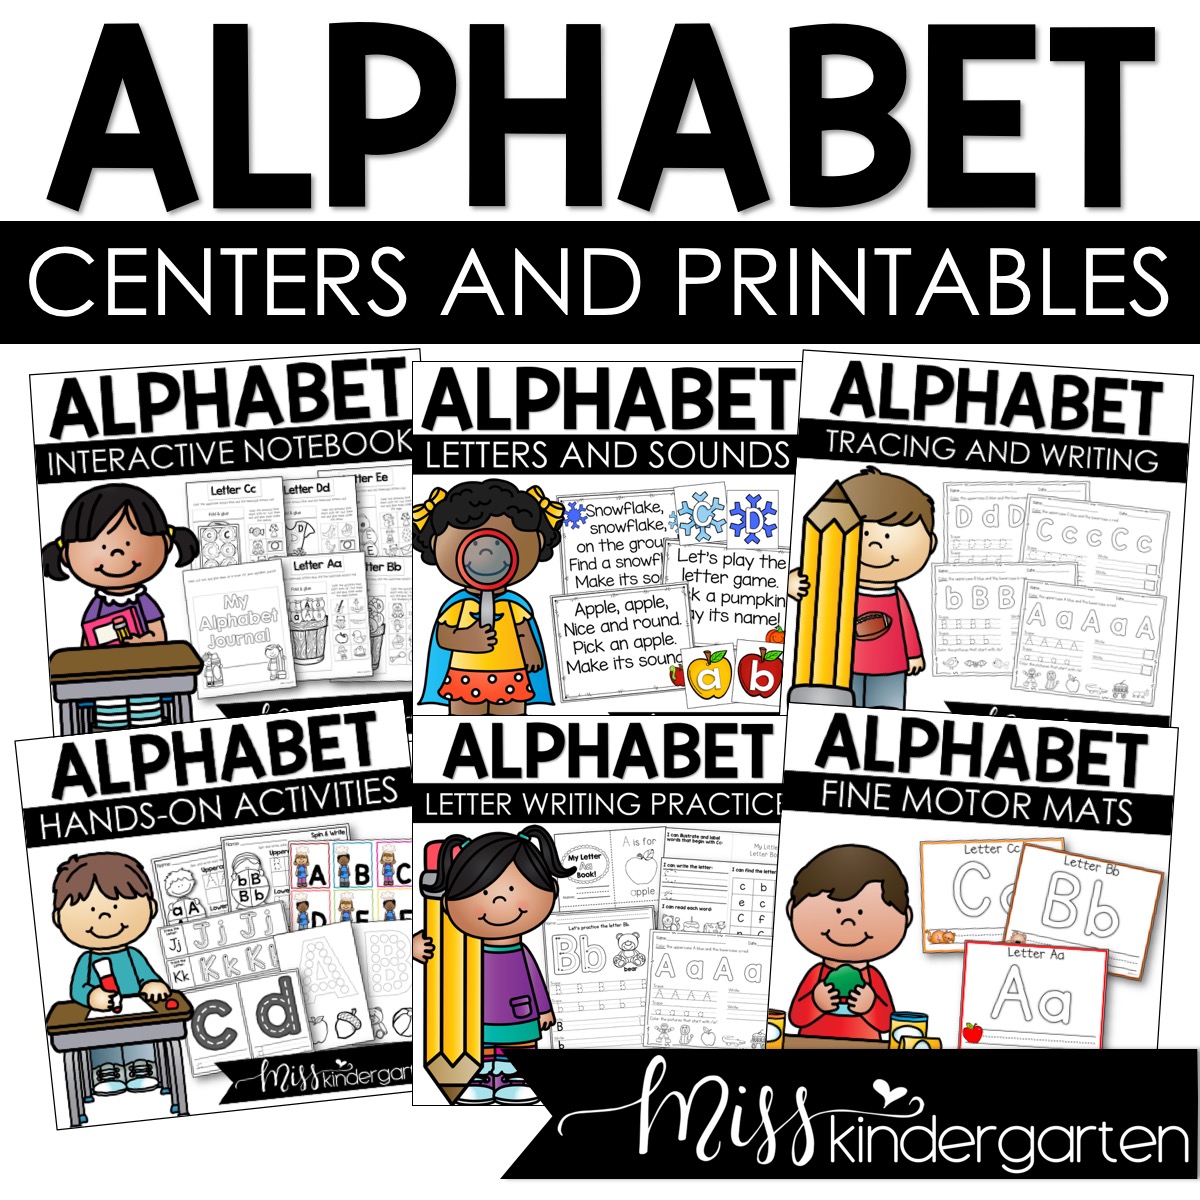 Alphabet Centers and Printables for the entire school year